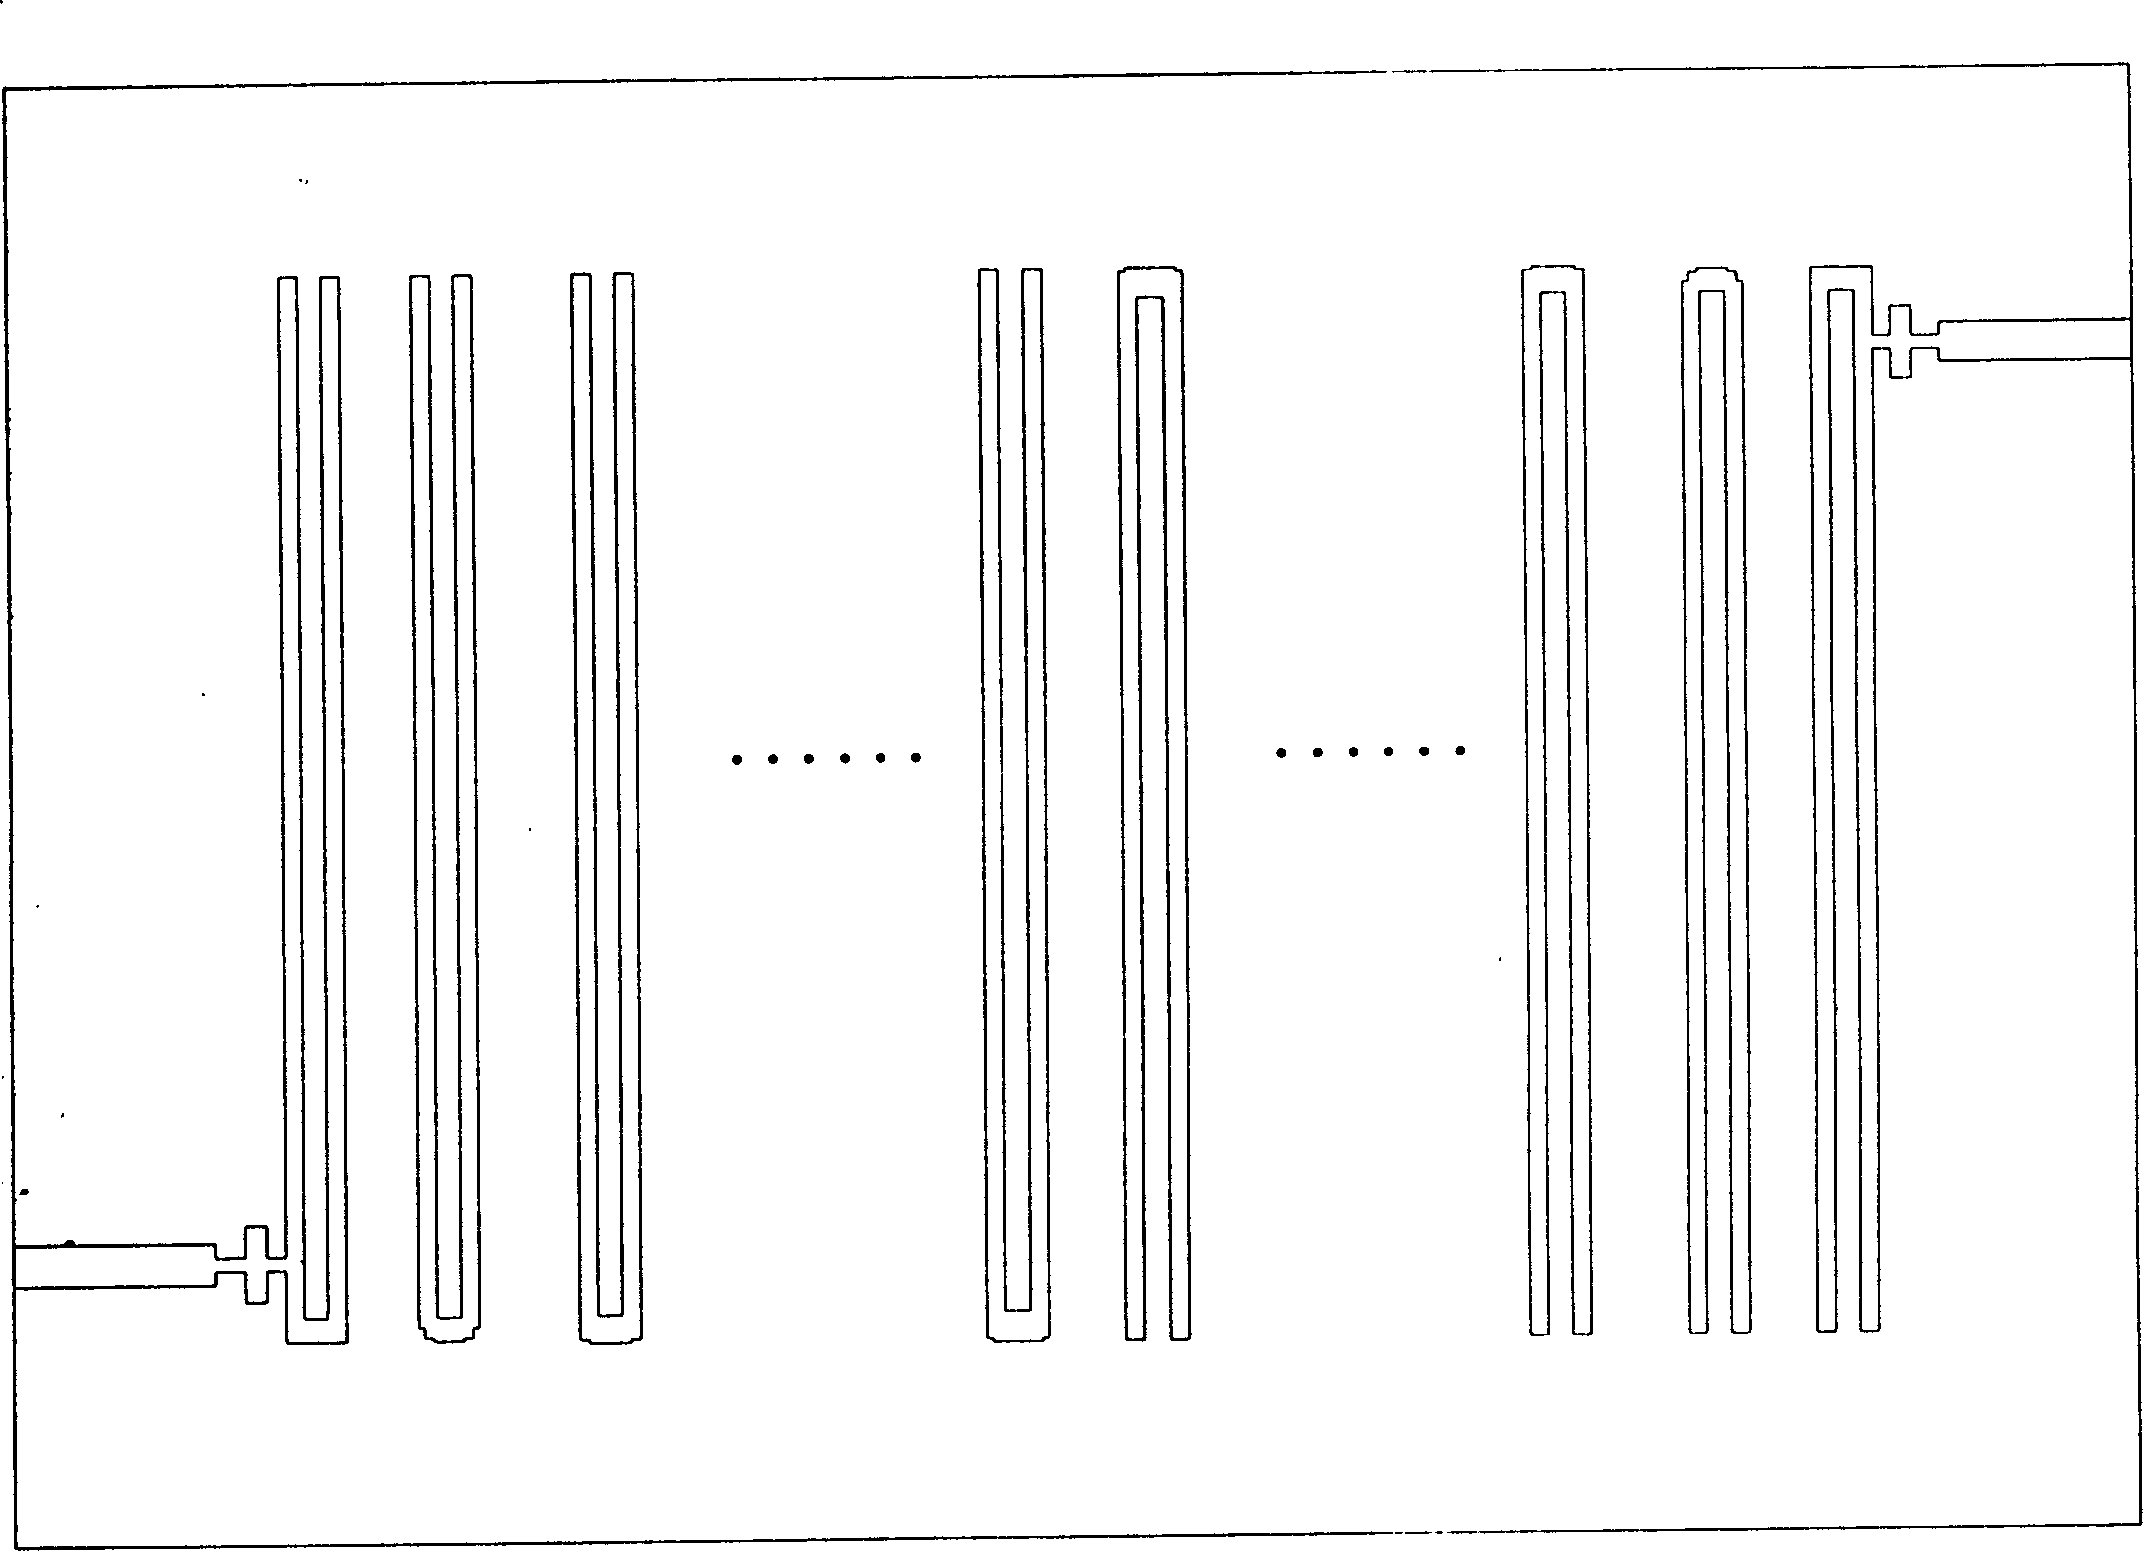 Crossing coupled filter of anti-parallel fold line